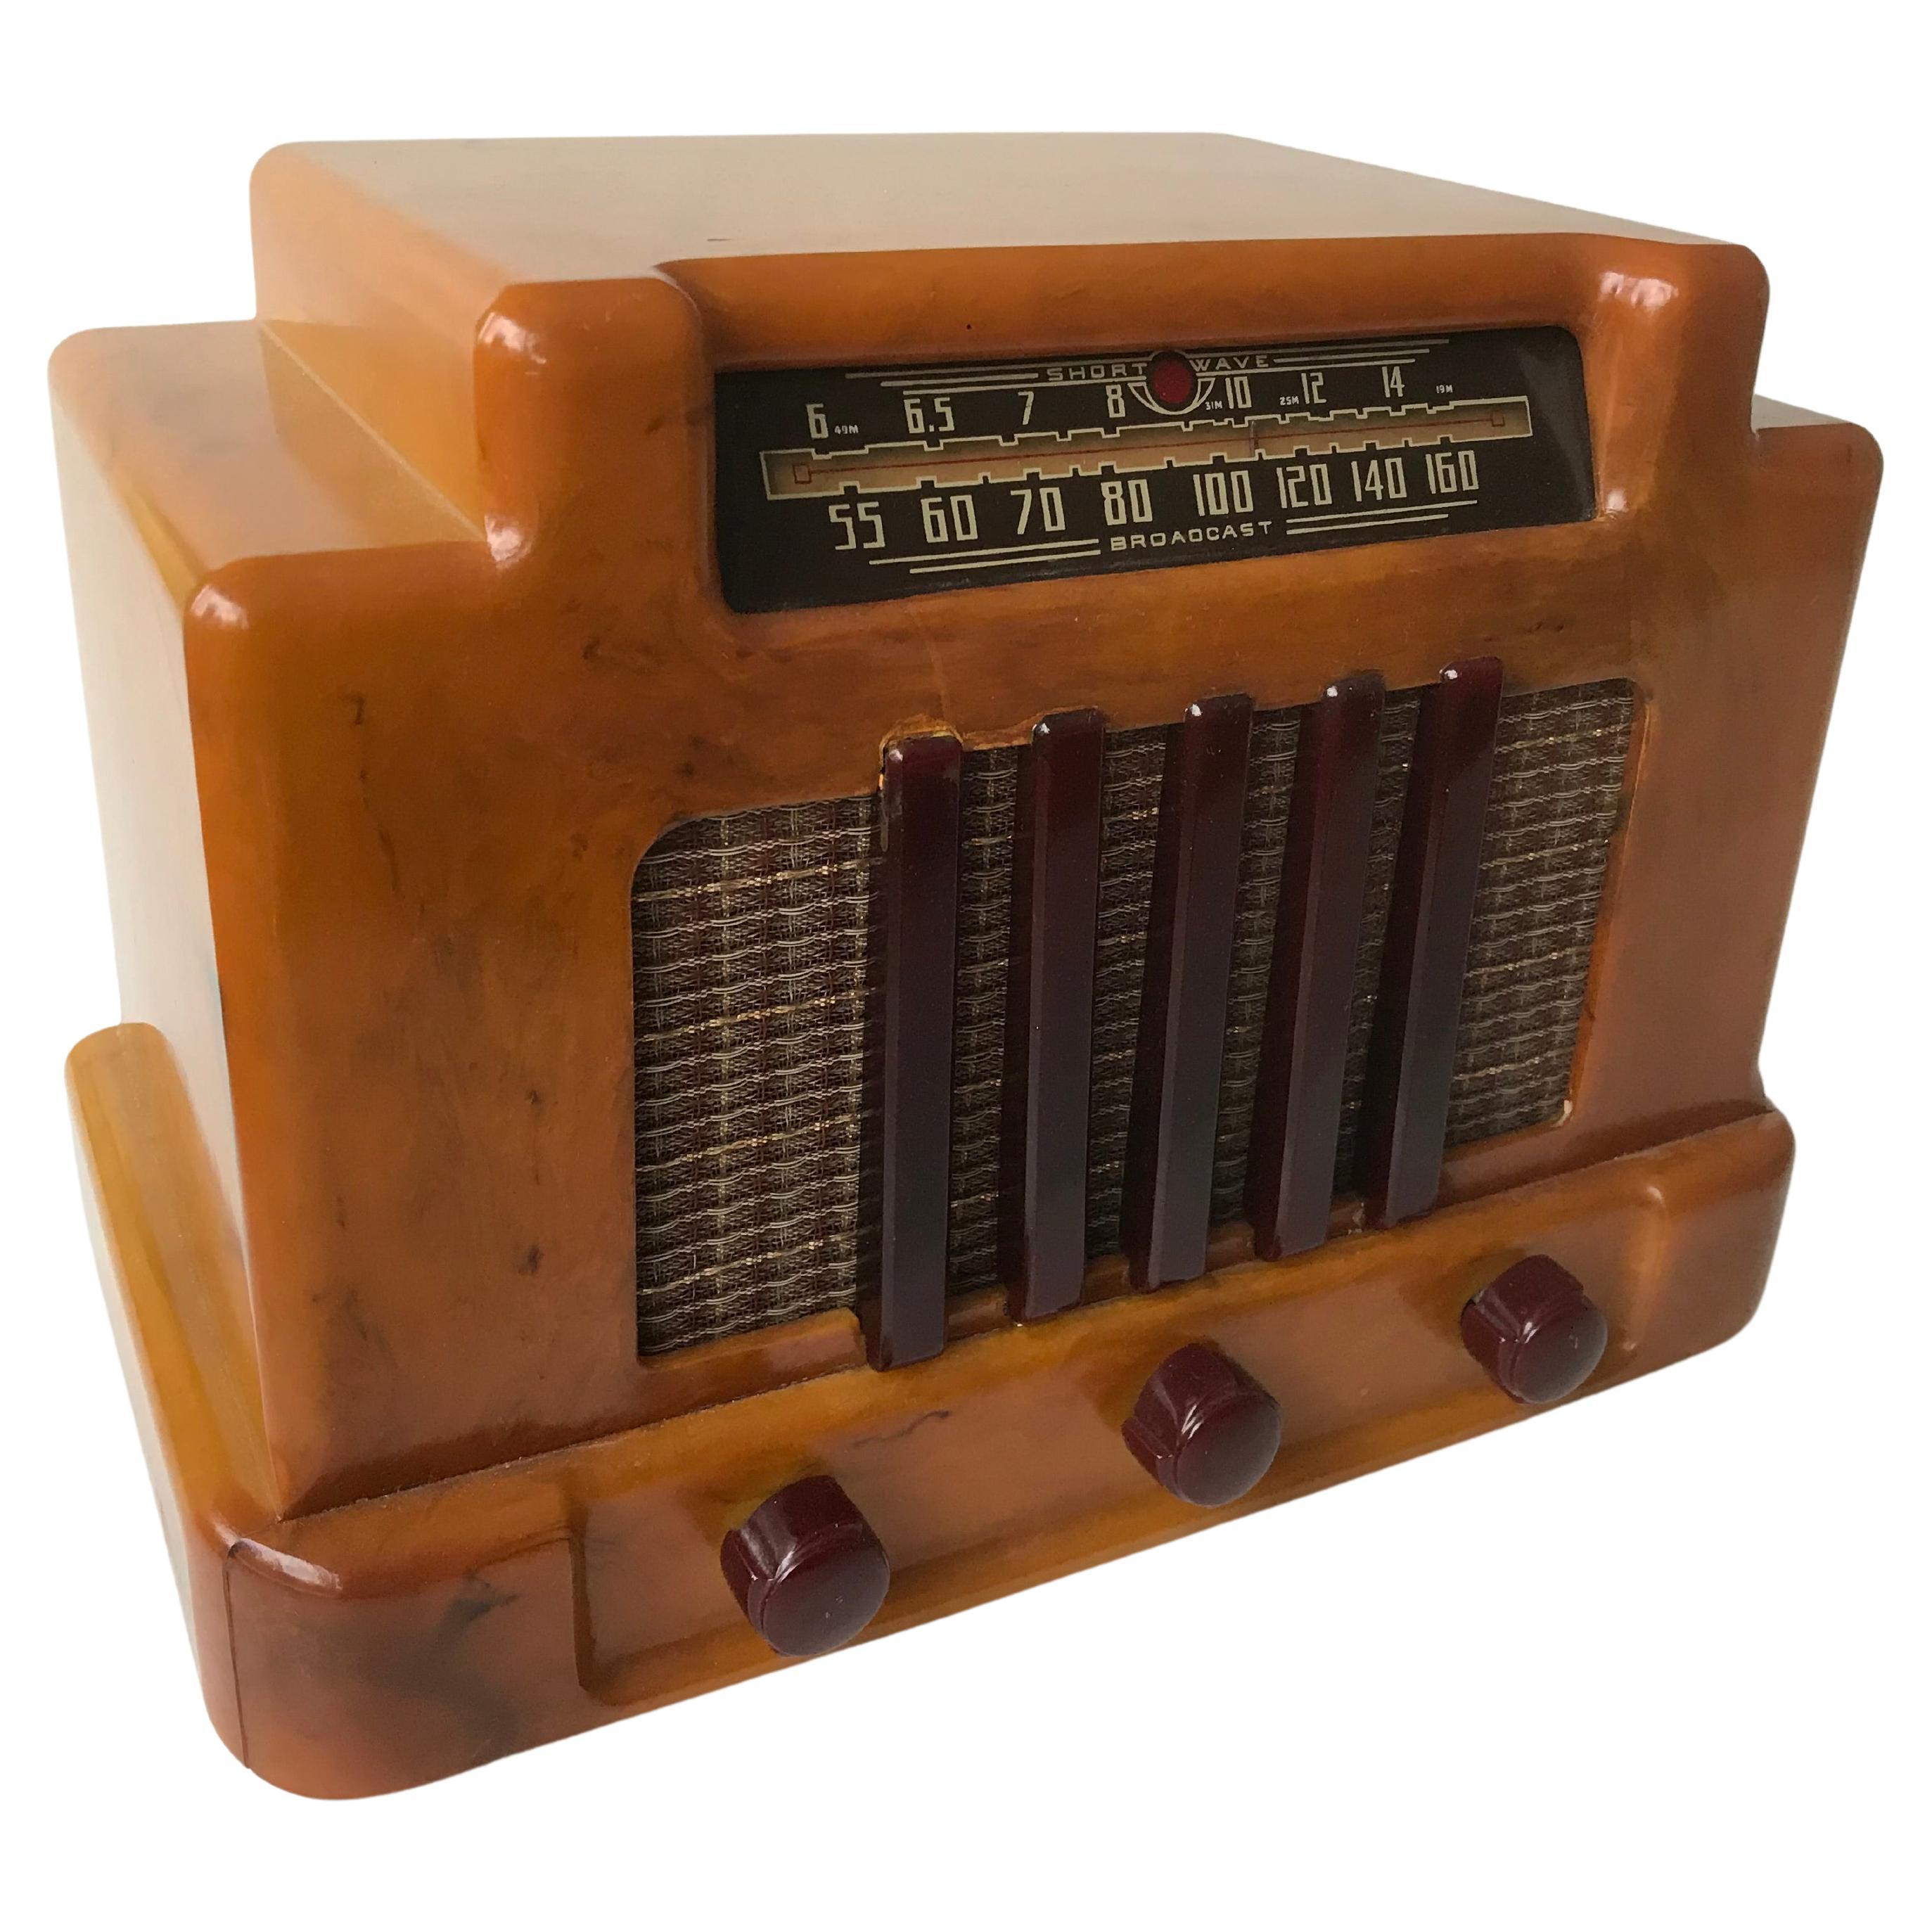 Addison Model 5 Butterscotch and Maroon Catalin Tube Radio, 1940